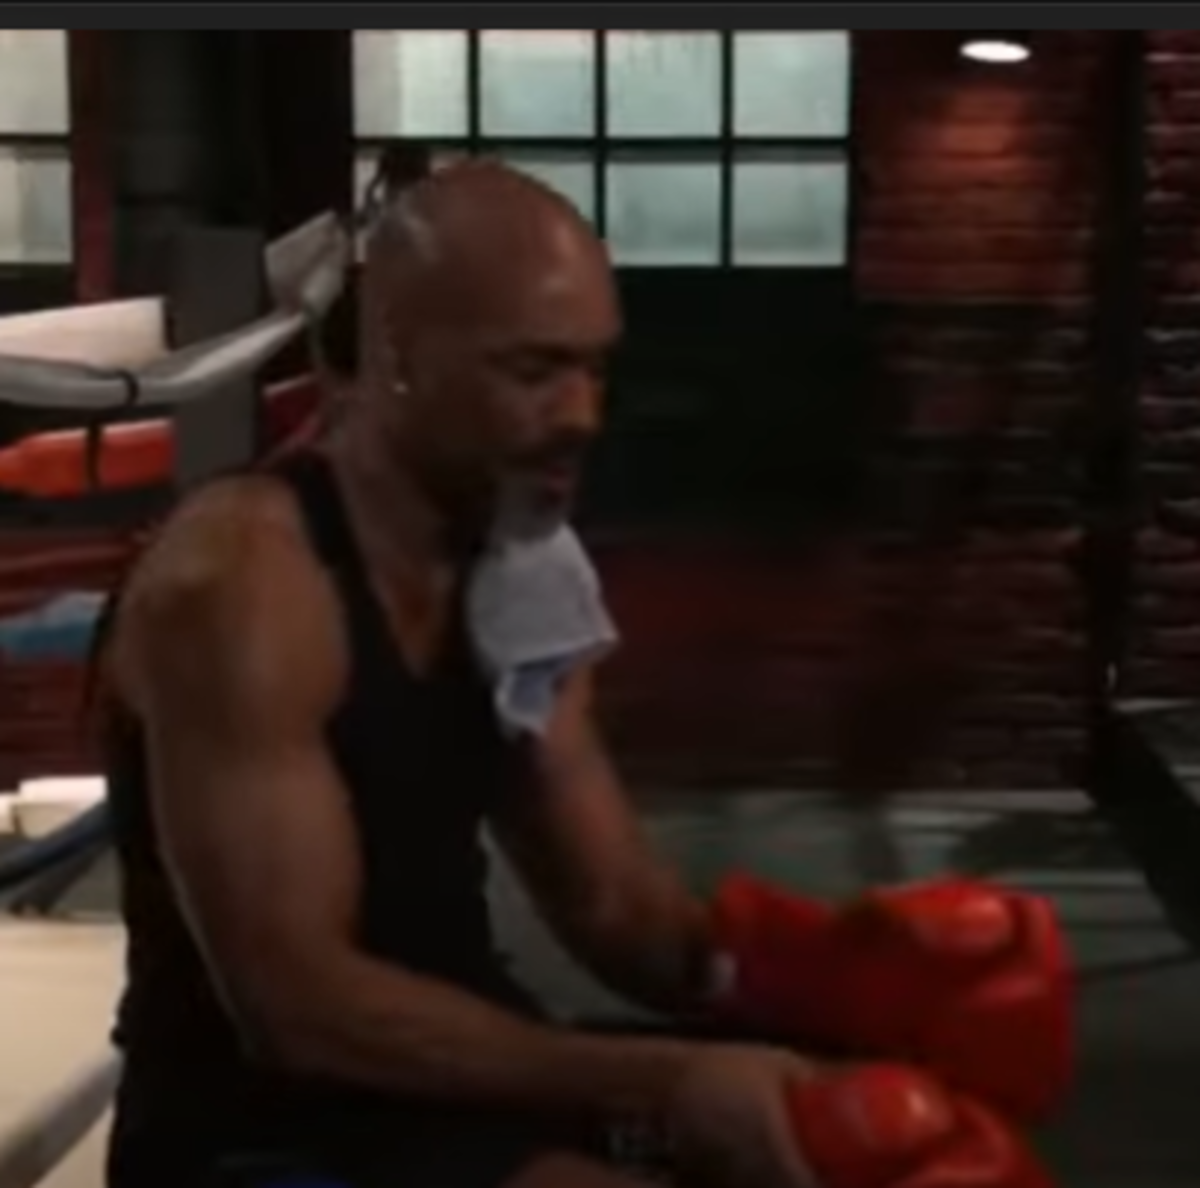 Curtis in black shirt, red boxing gloves and white towel.